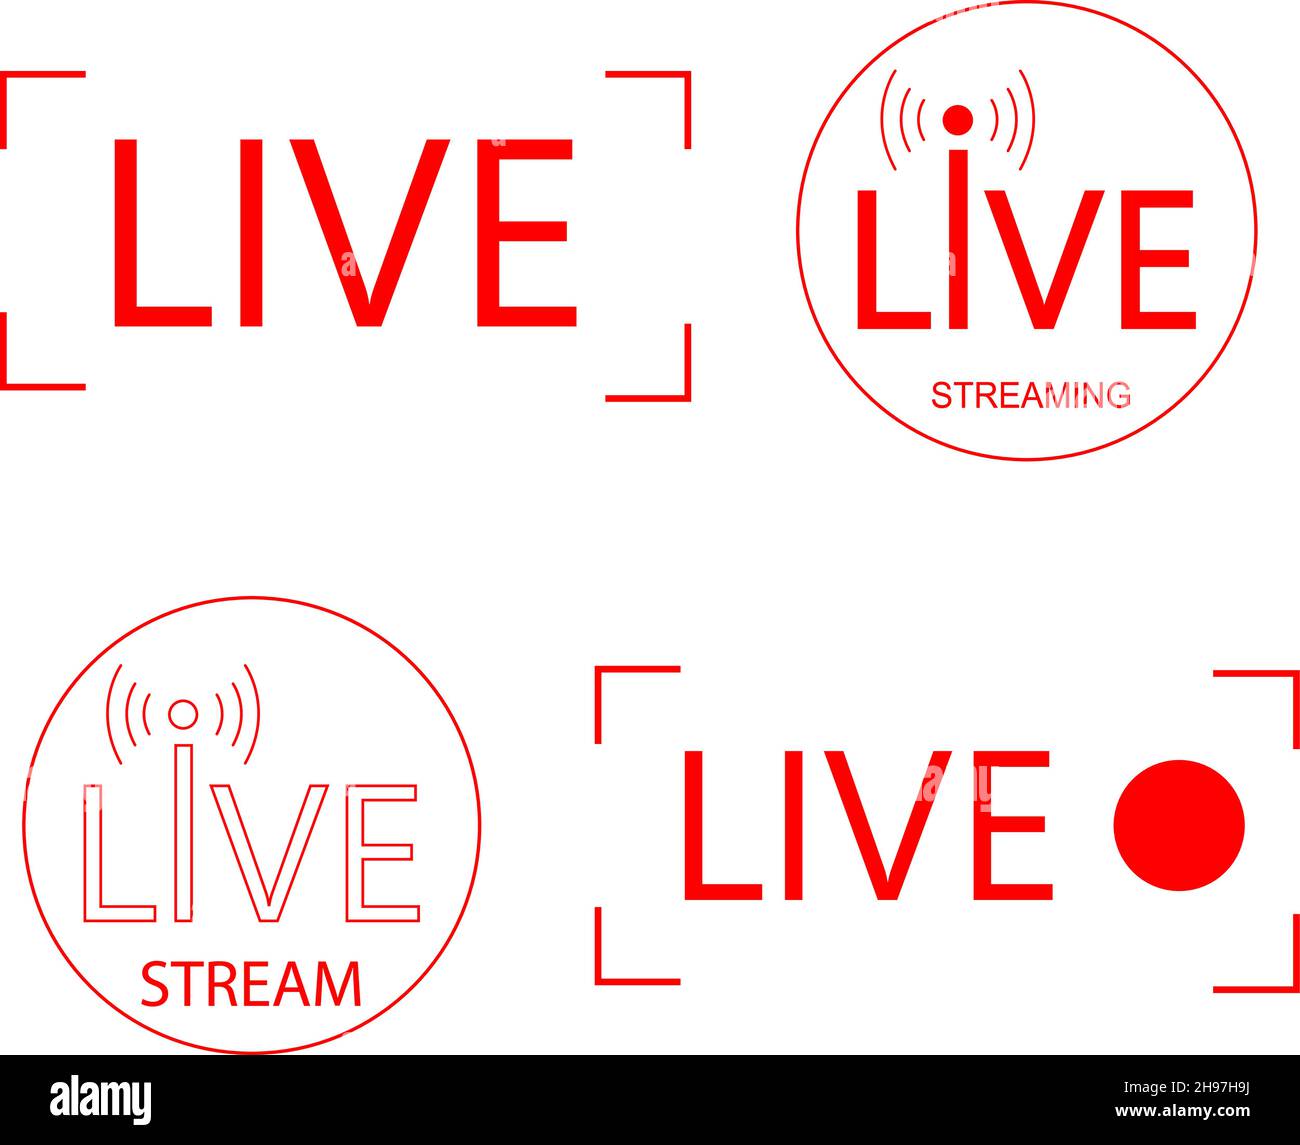 Live video streaming vector icons collection. Red symbols of live streaming illustration. Broadcasting, online video stream elements for TV blogs, sho Stock Vector